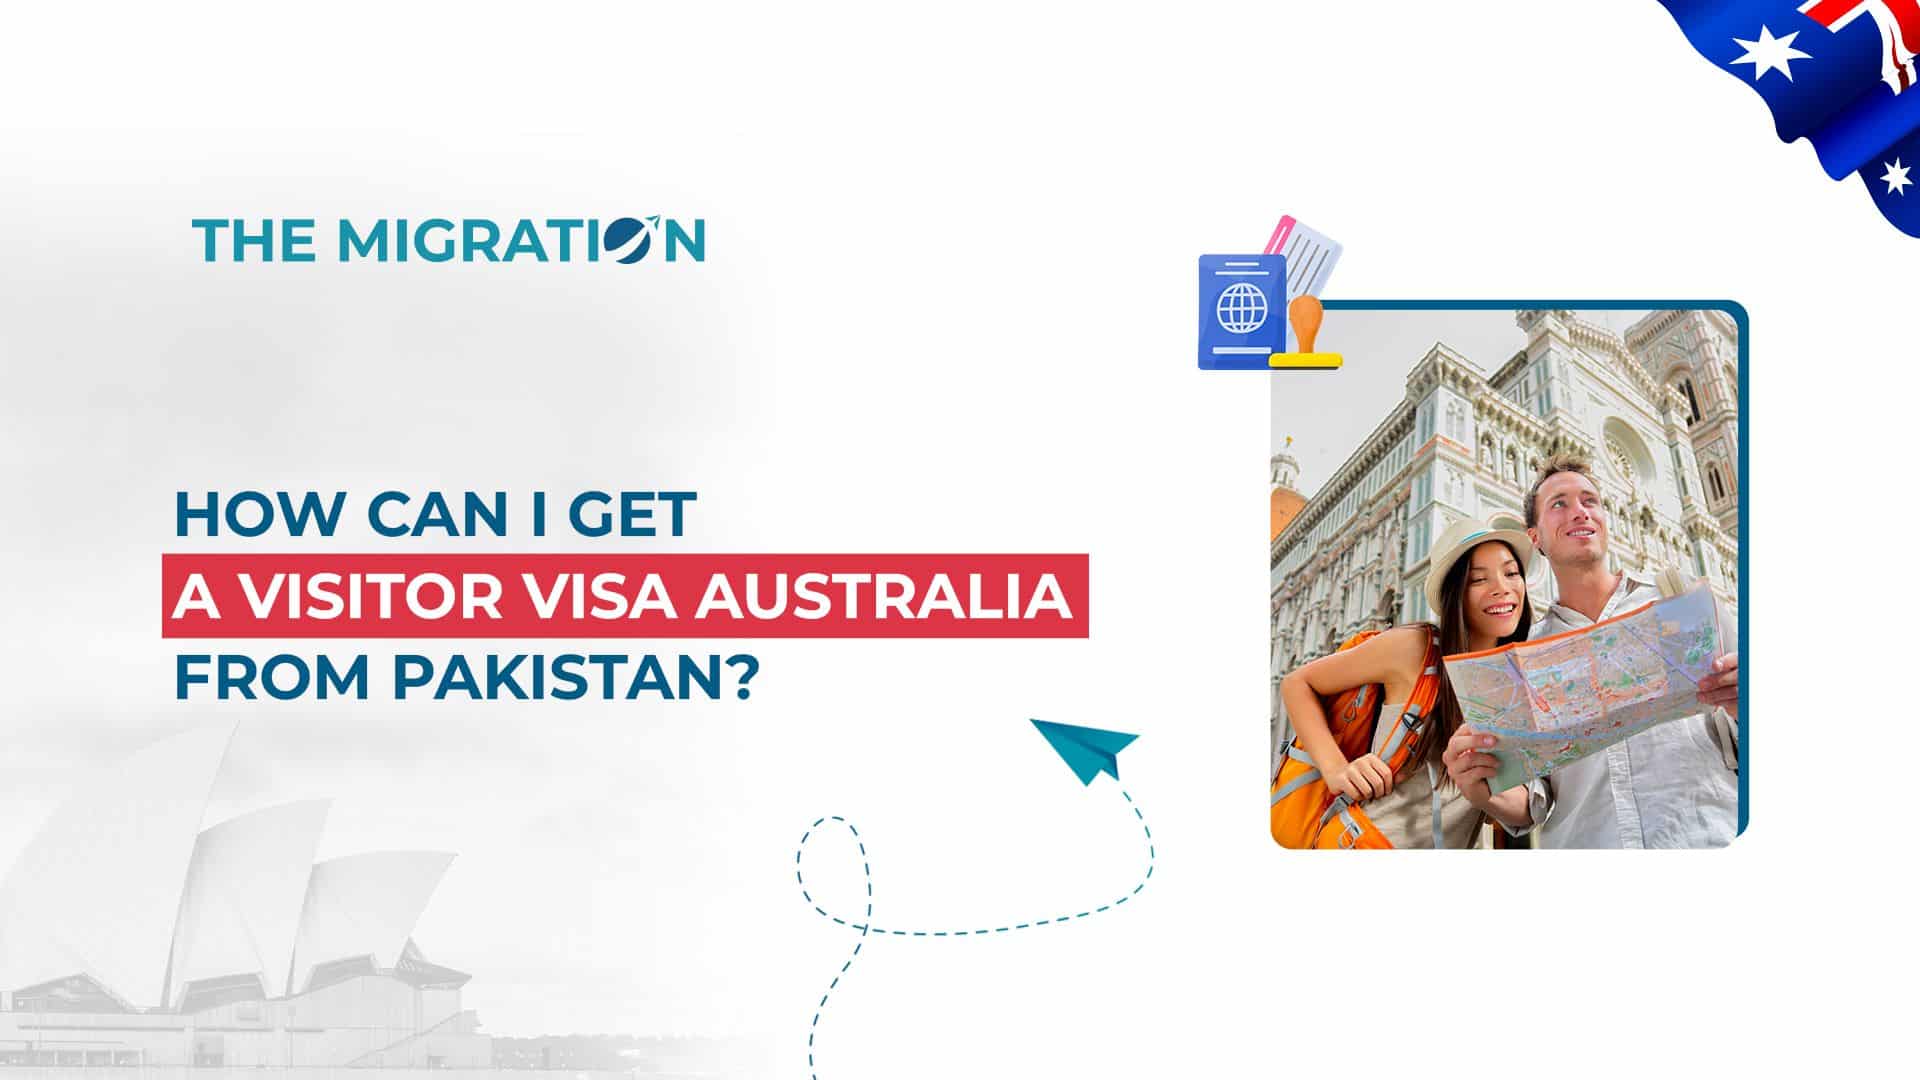 How Can I Get a Visitor Visa Australia from Pakistan